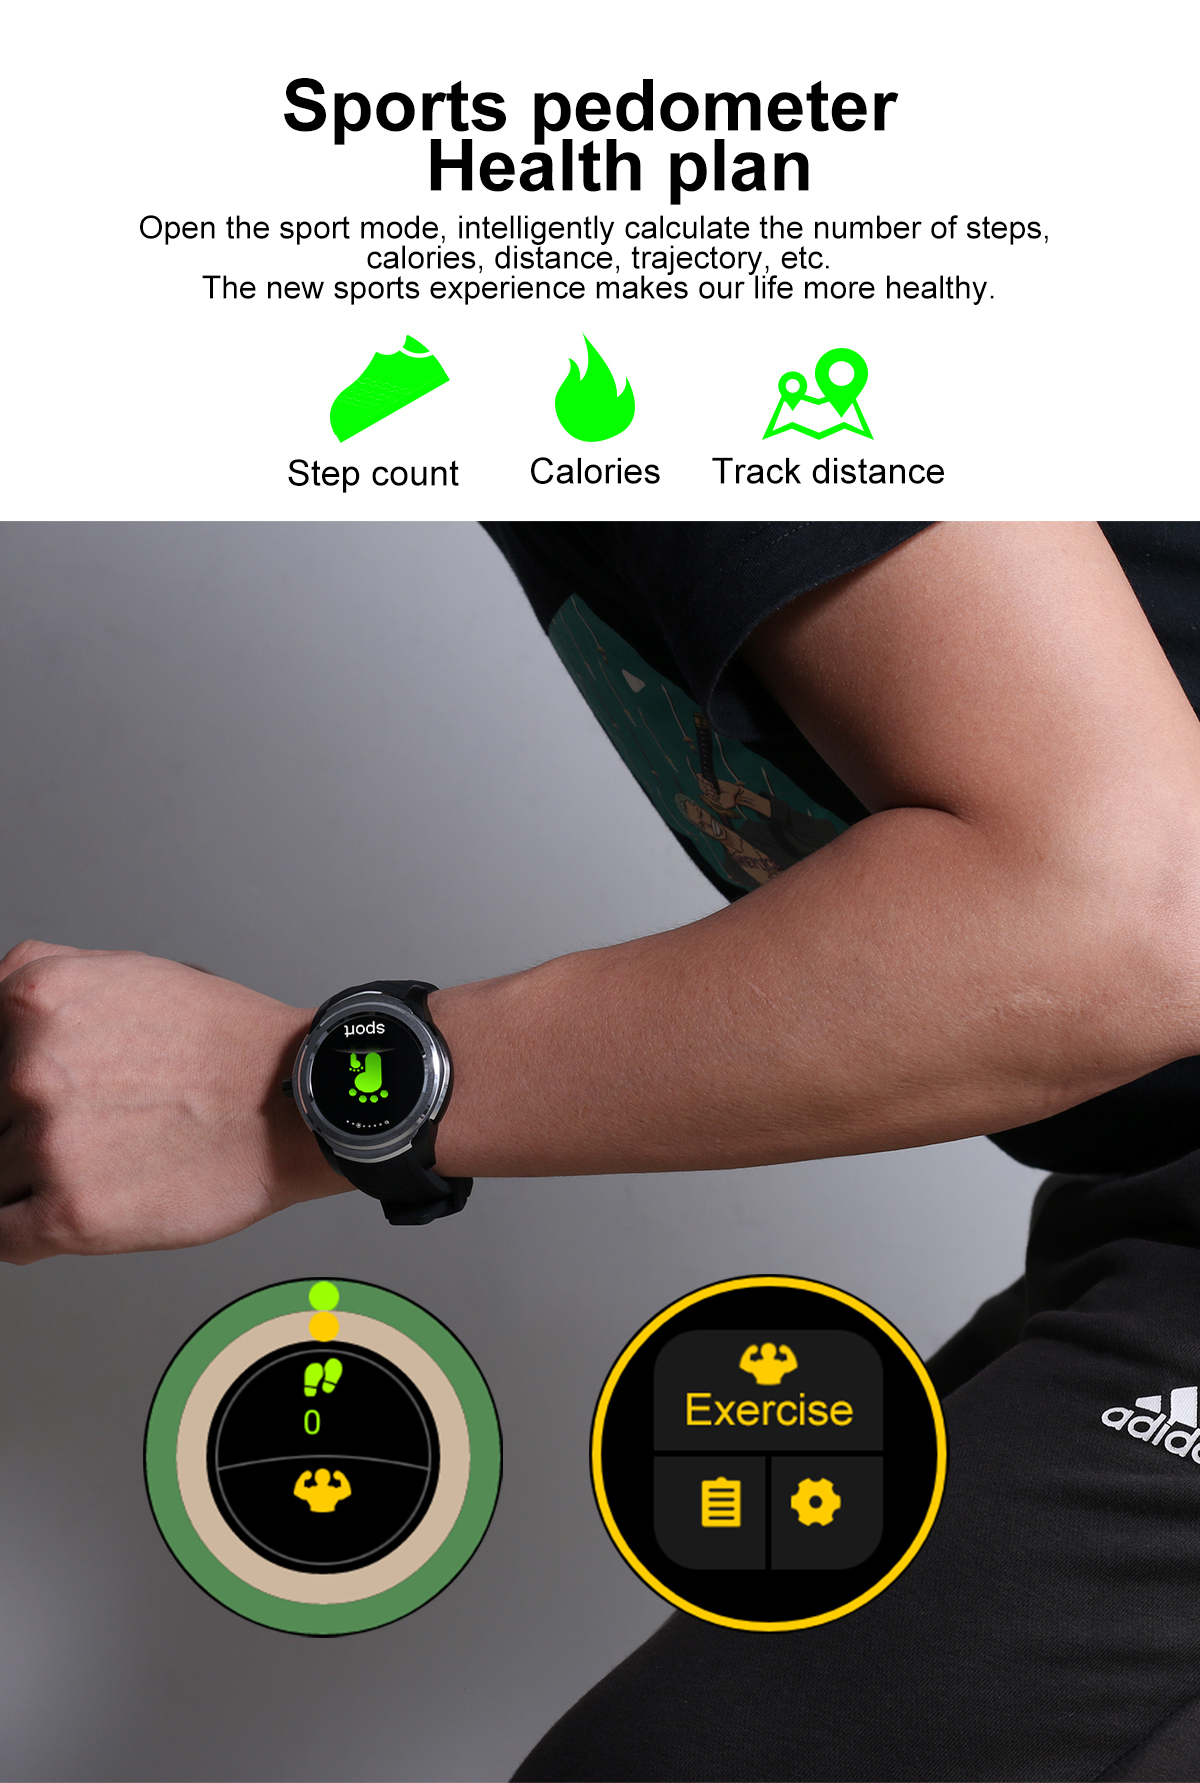 Bakeey C1 1.3inch 512MB 8GB GPS Heart Rate Monitor Pedometer bluetooth Smart Watch For iPhone X 8/8P